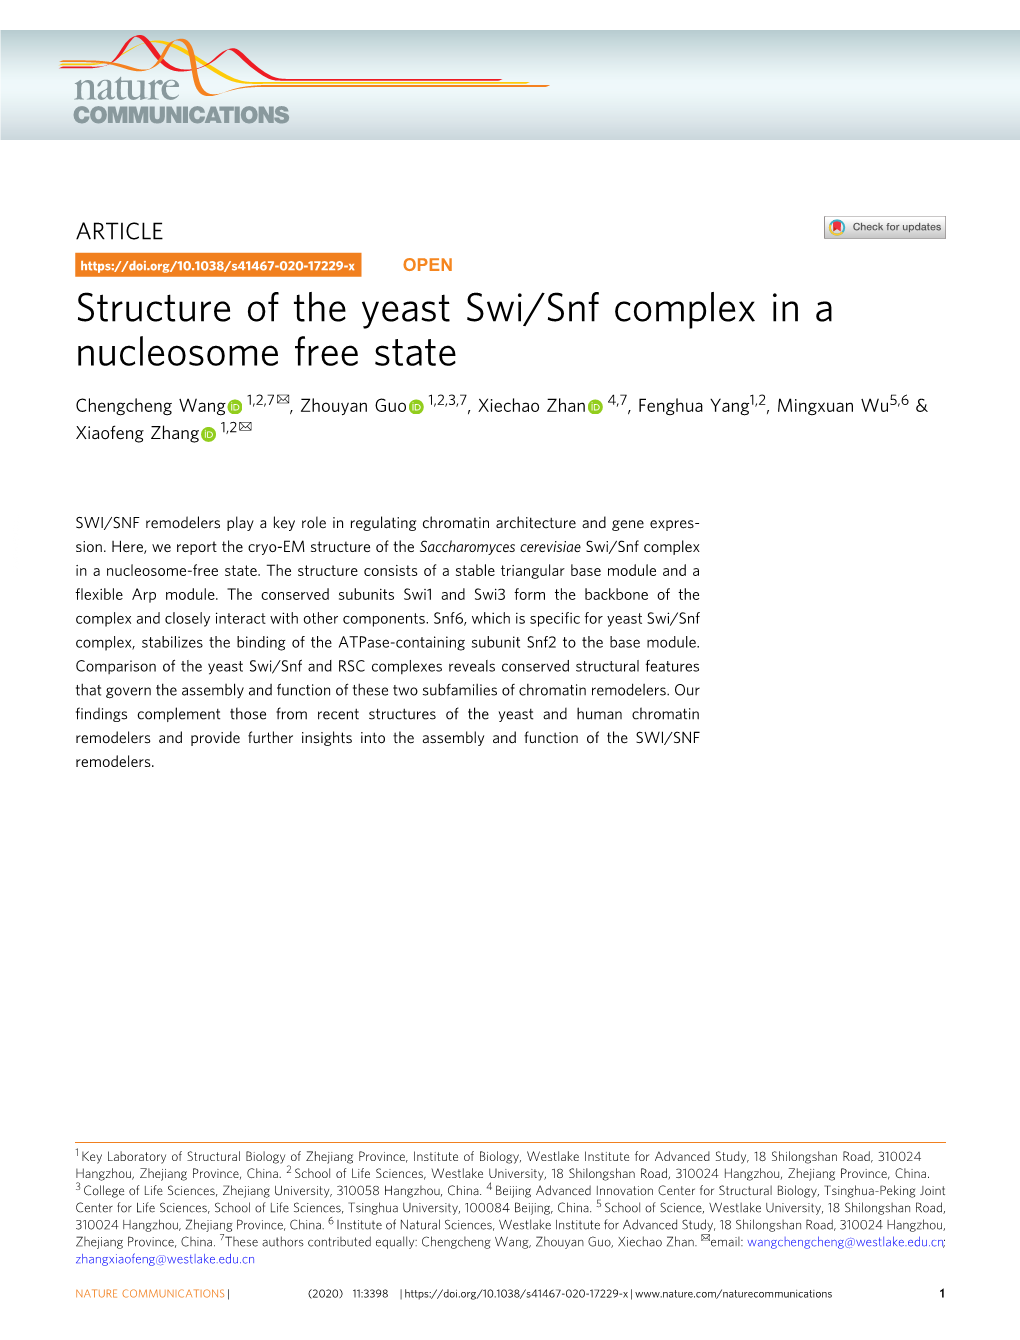 Structure of the Yeast Swi/Snf Complex in a Nucleosome Free State